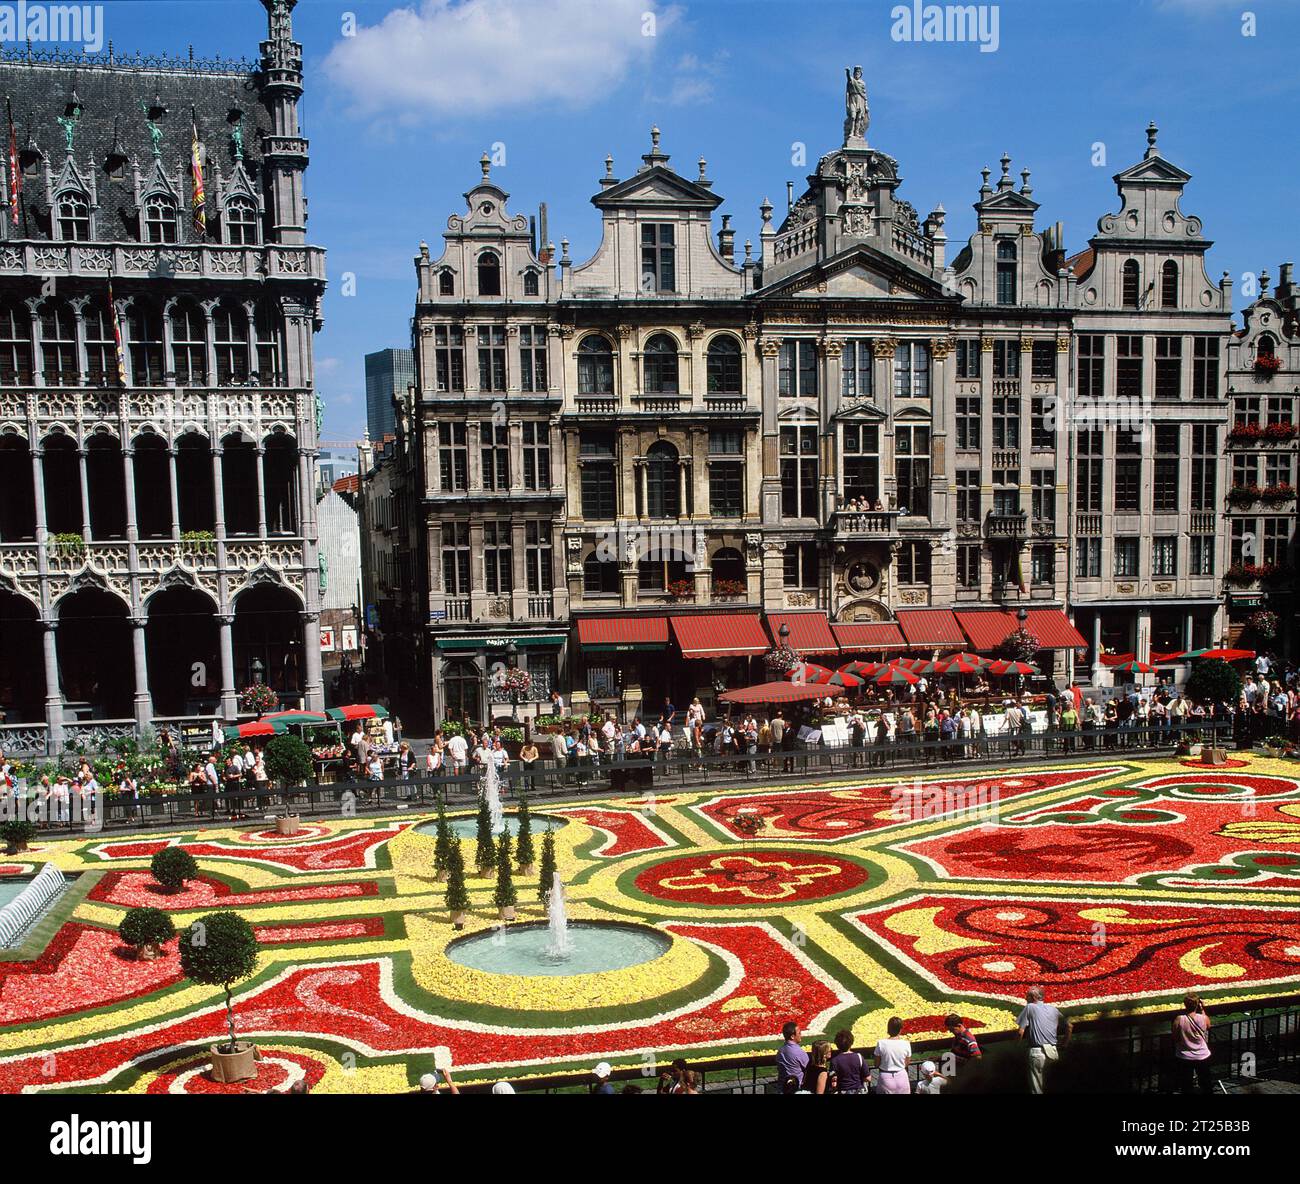 Belgium. Brussels. The Grand Place Flower Carpet. Stock Photo